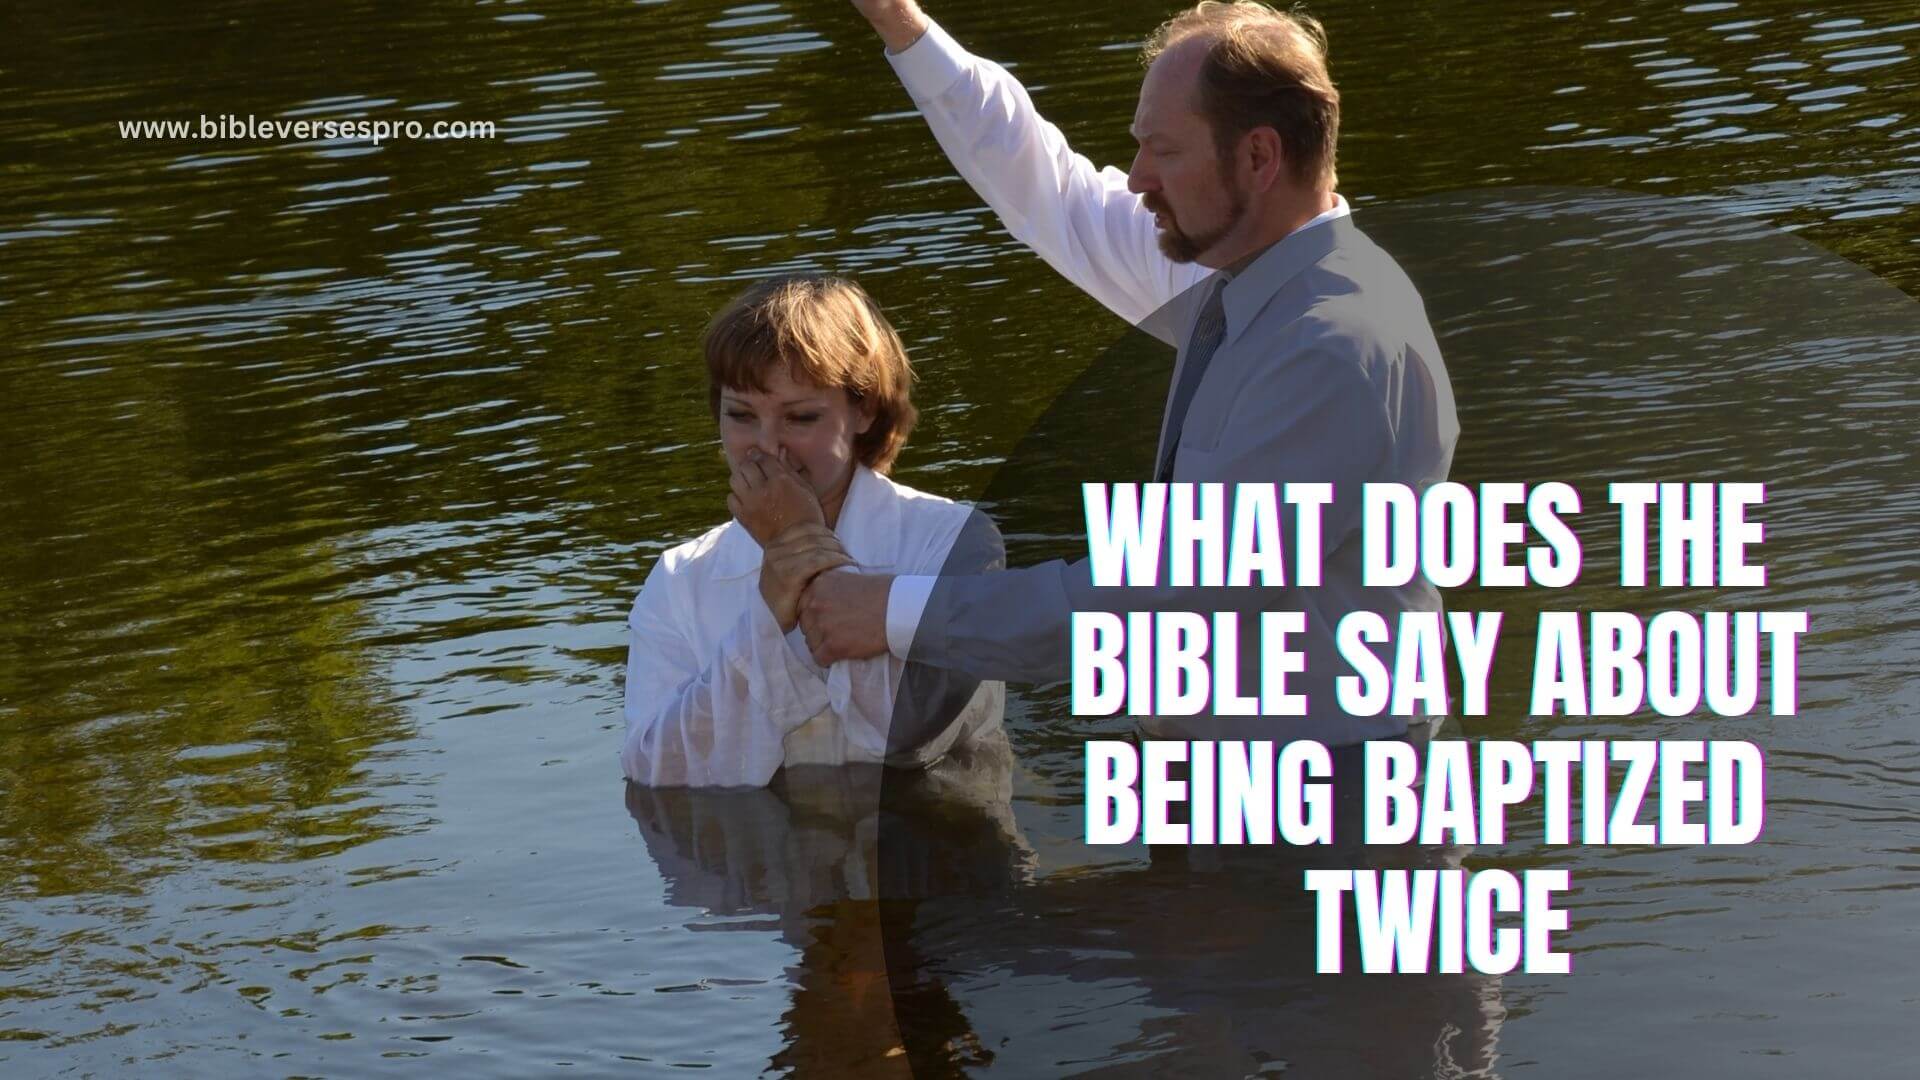 WHAT DOES THE BIBLE SAY ABOUT BEING BAPTIZED TWICE (1)